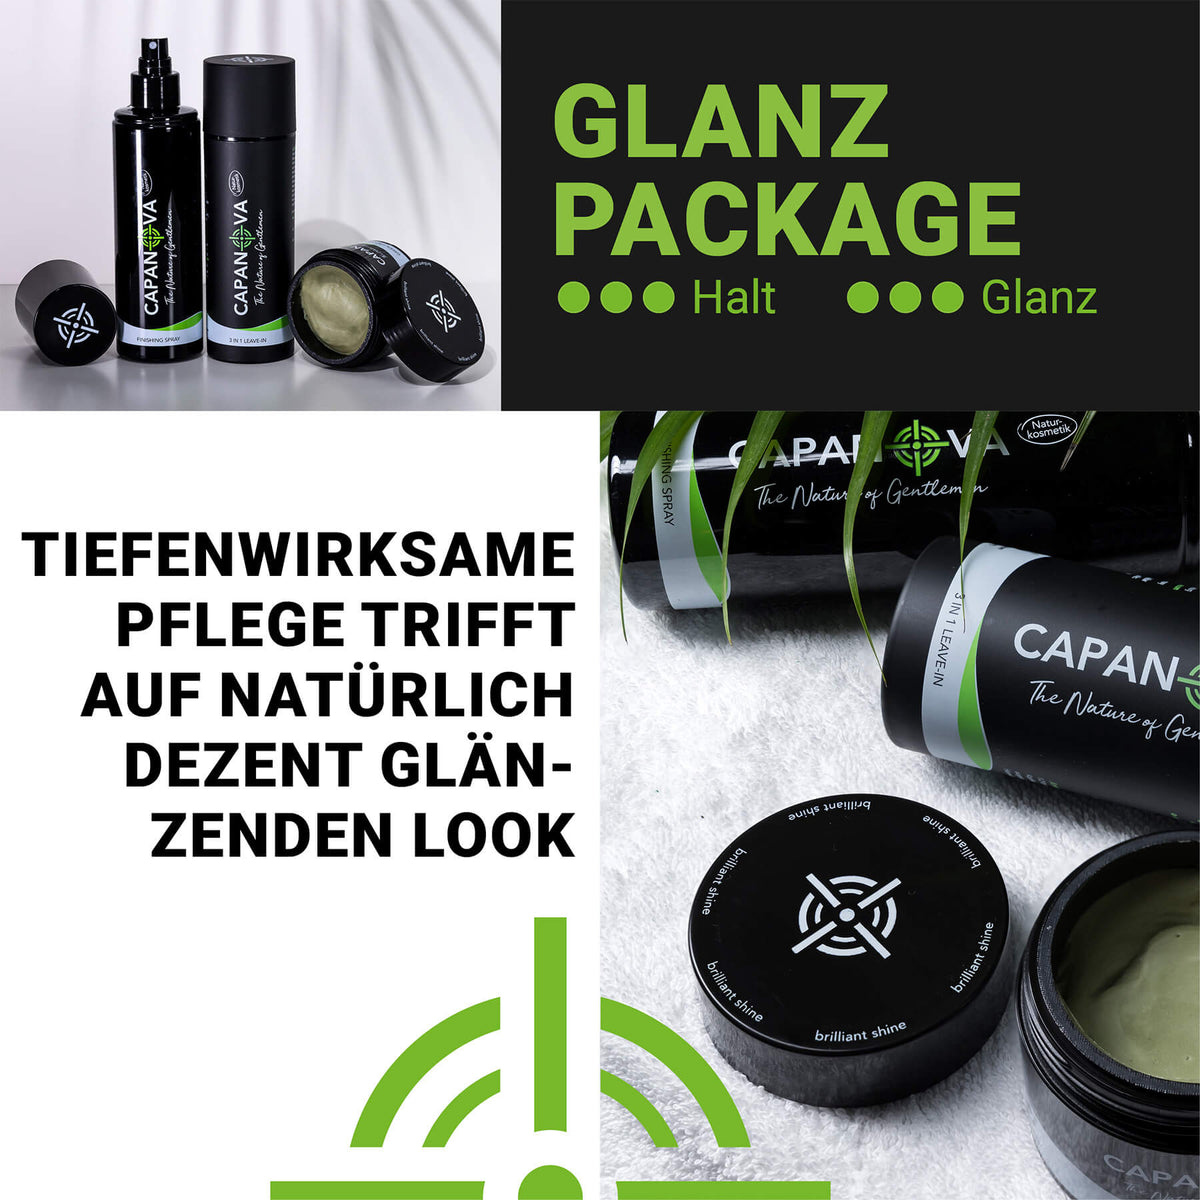 Glanz-Package